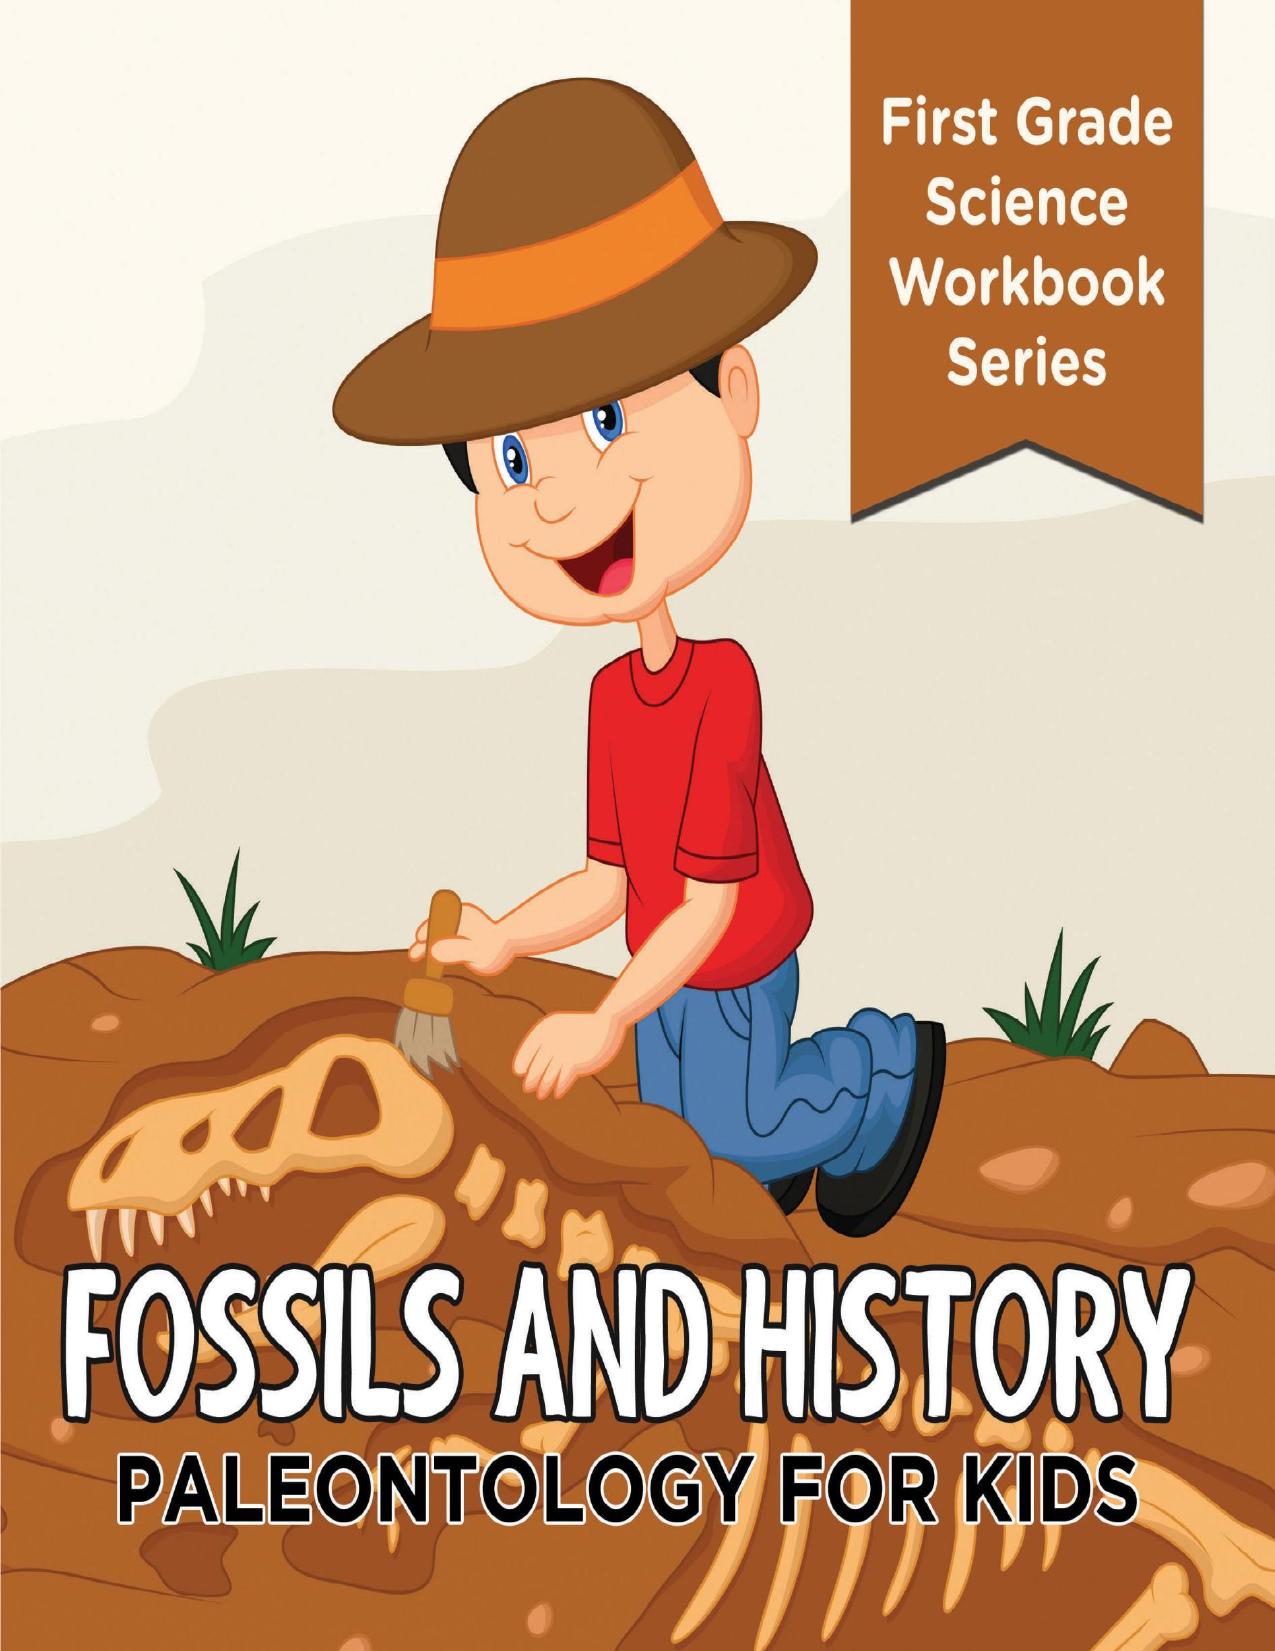 Fossils And History : Paleontology for Kids (First Grade Science Workbook Series) (Children's Prehistoric History Books) by Baby Professor